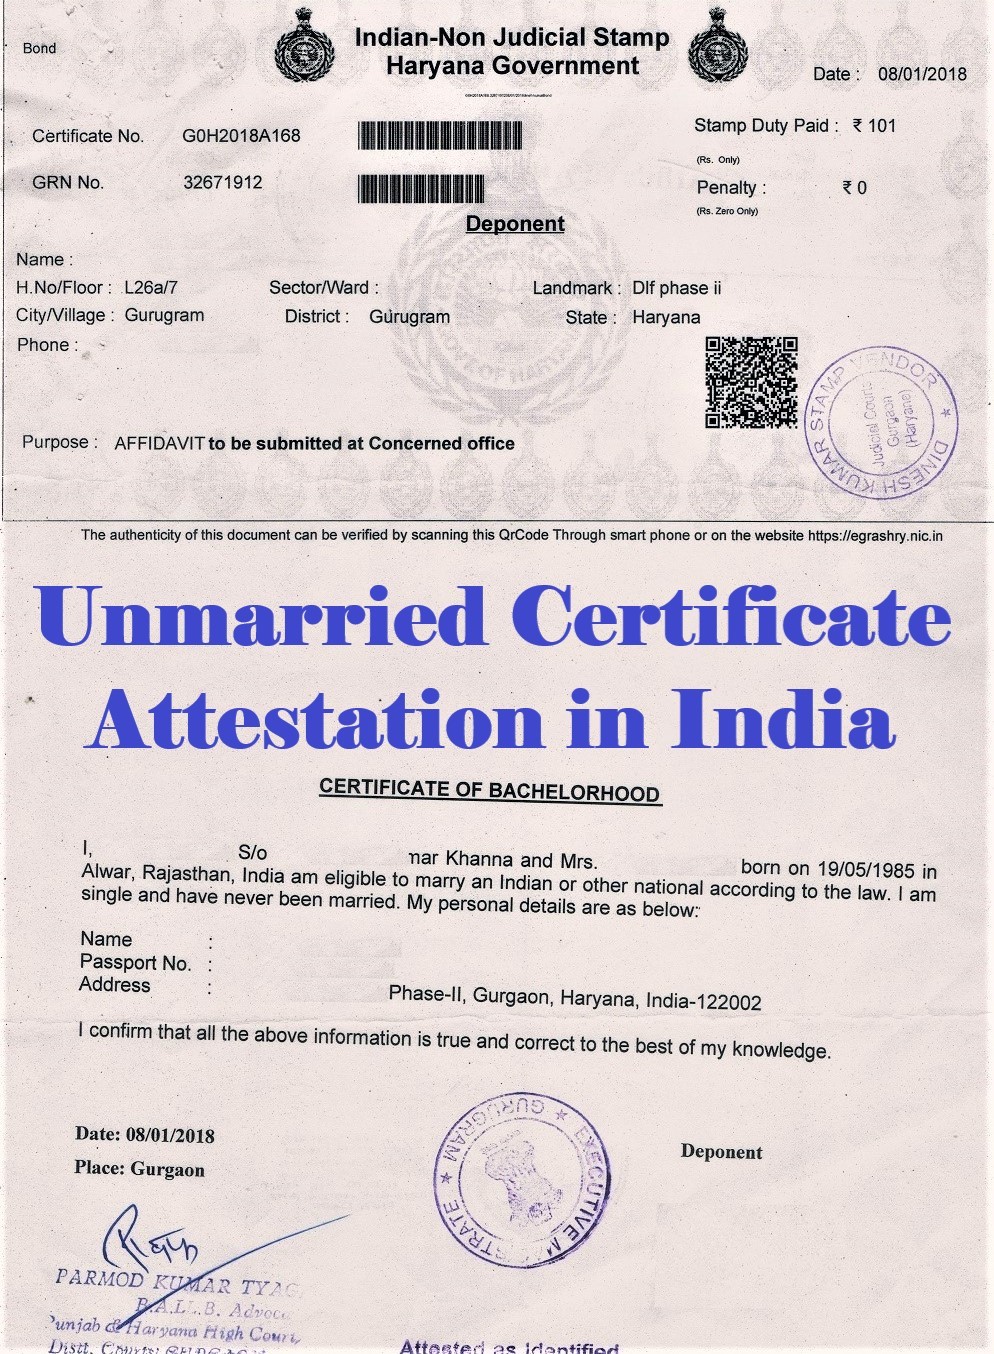 Unmarried Certificate Attestation from Cameroon Embassy